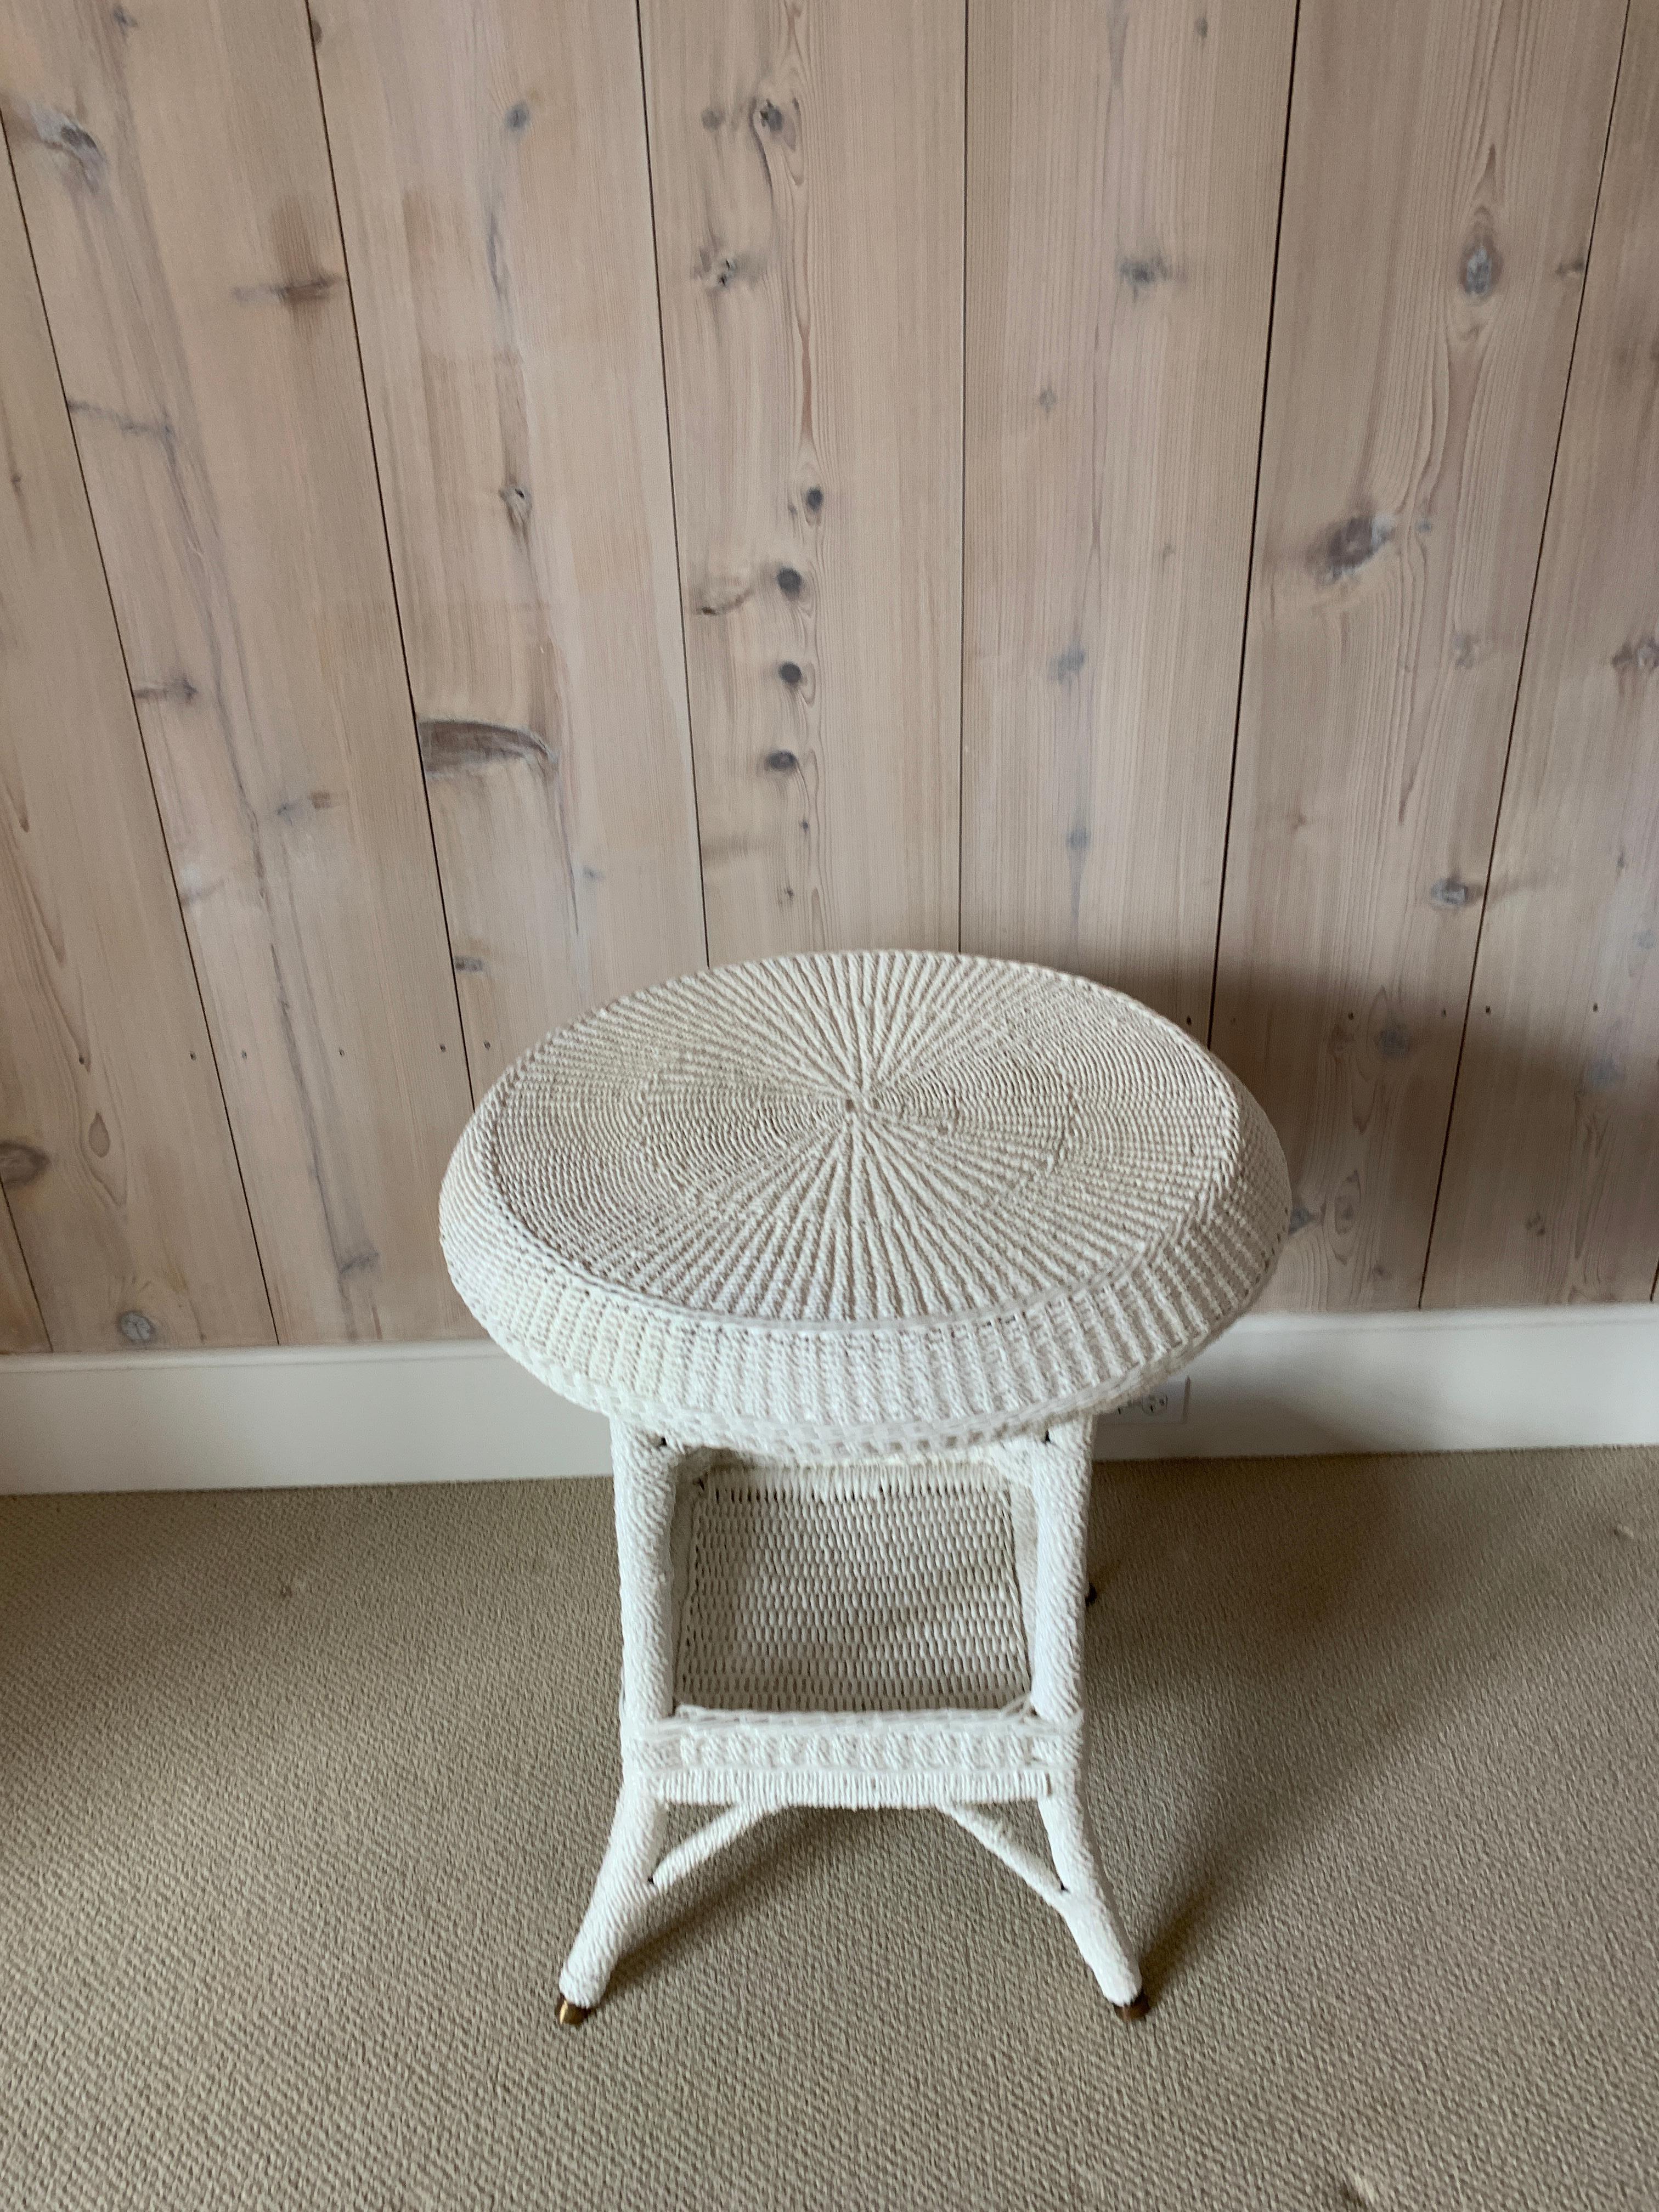 Antique Seagrass Table In Good Condition For Sale In Old Saybrook, CT